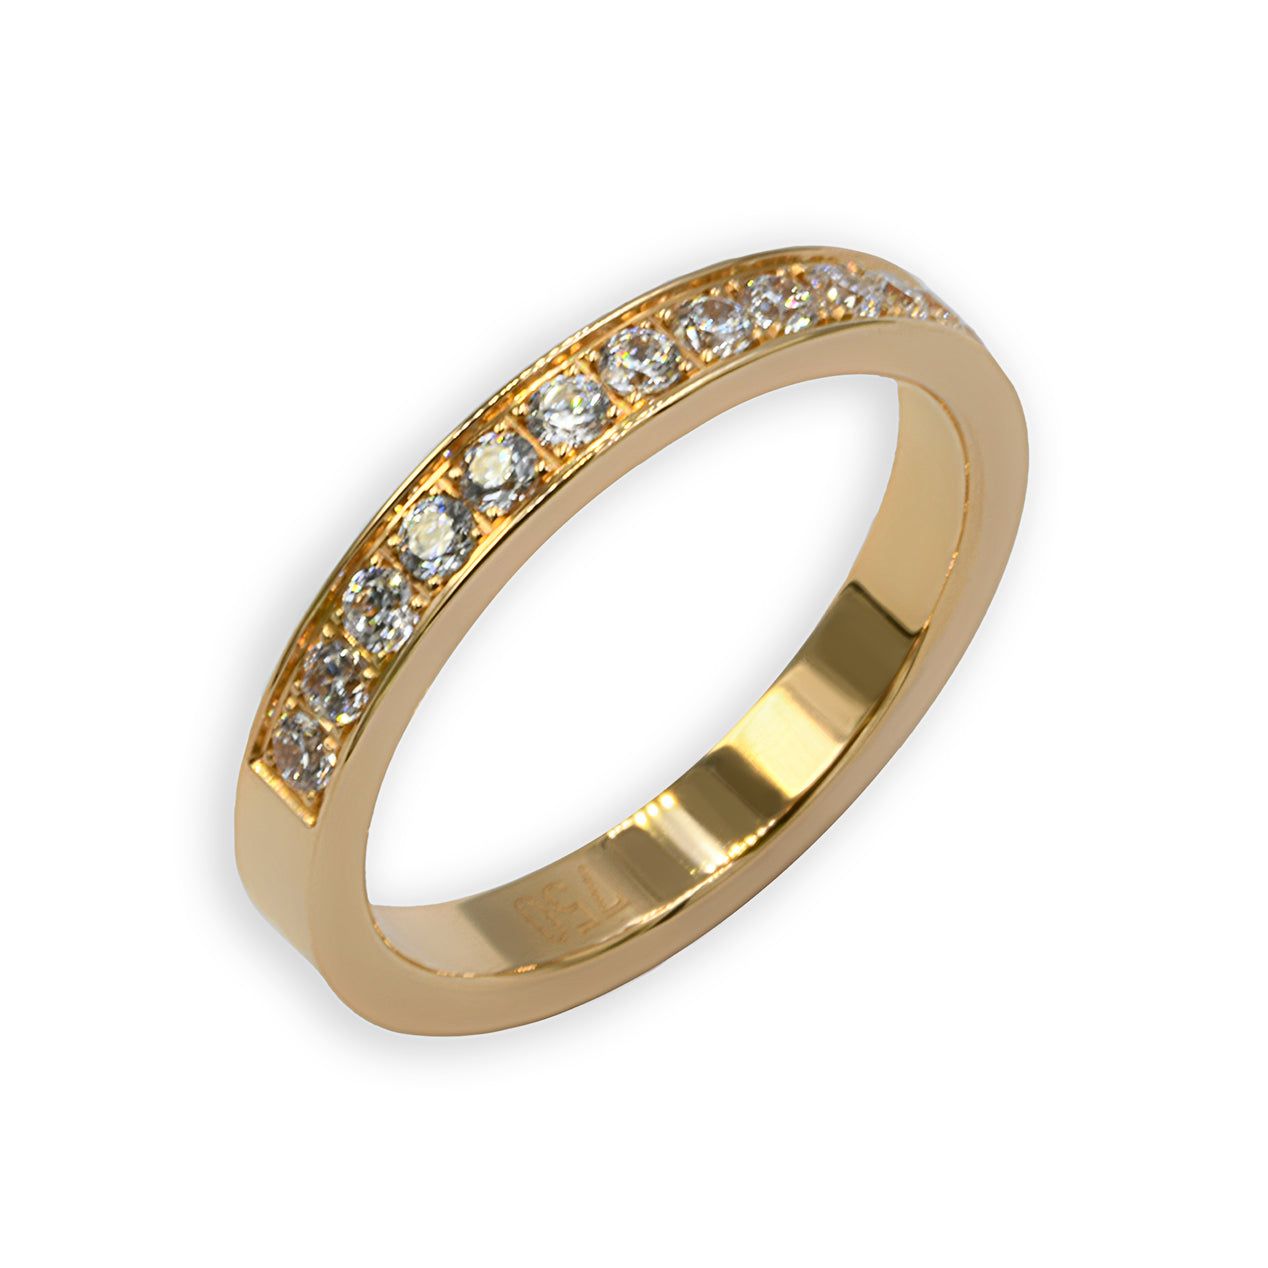 Ring EARTH IS ROUND 3mm yellow gold 18k 15x diamonds VS